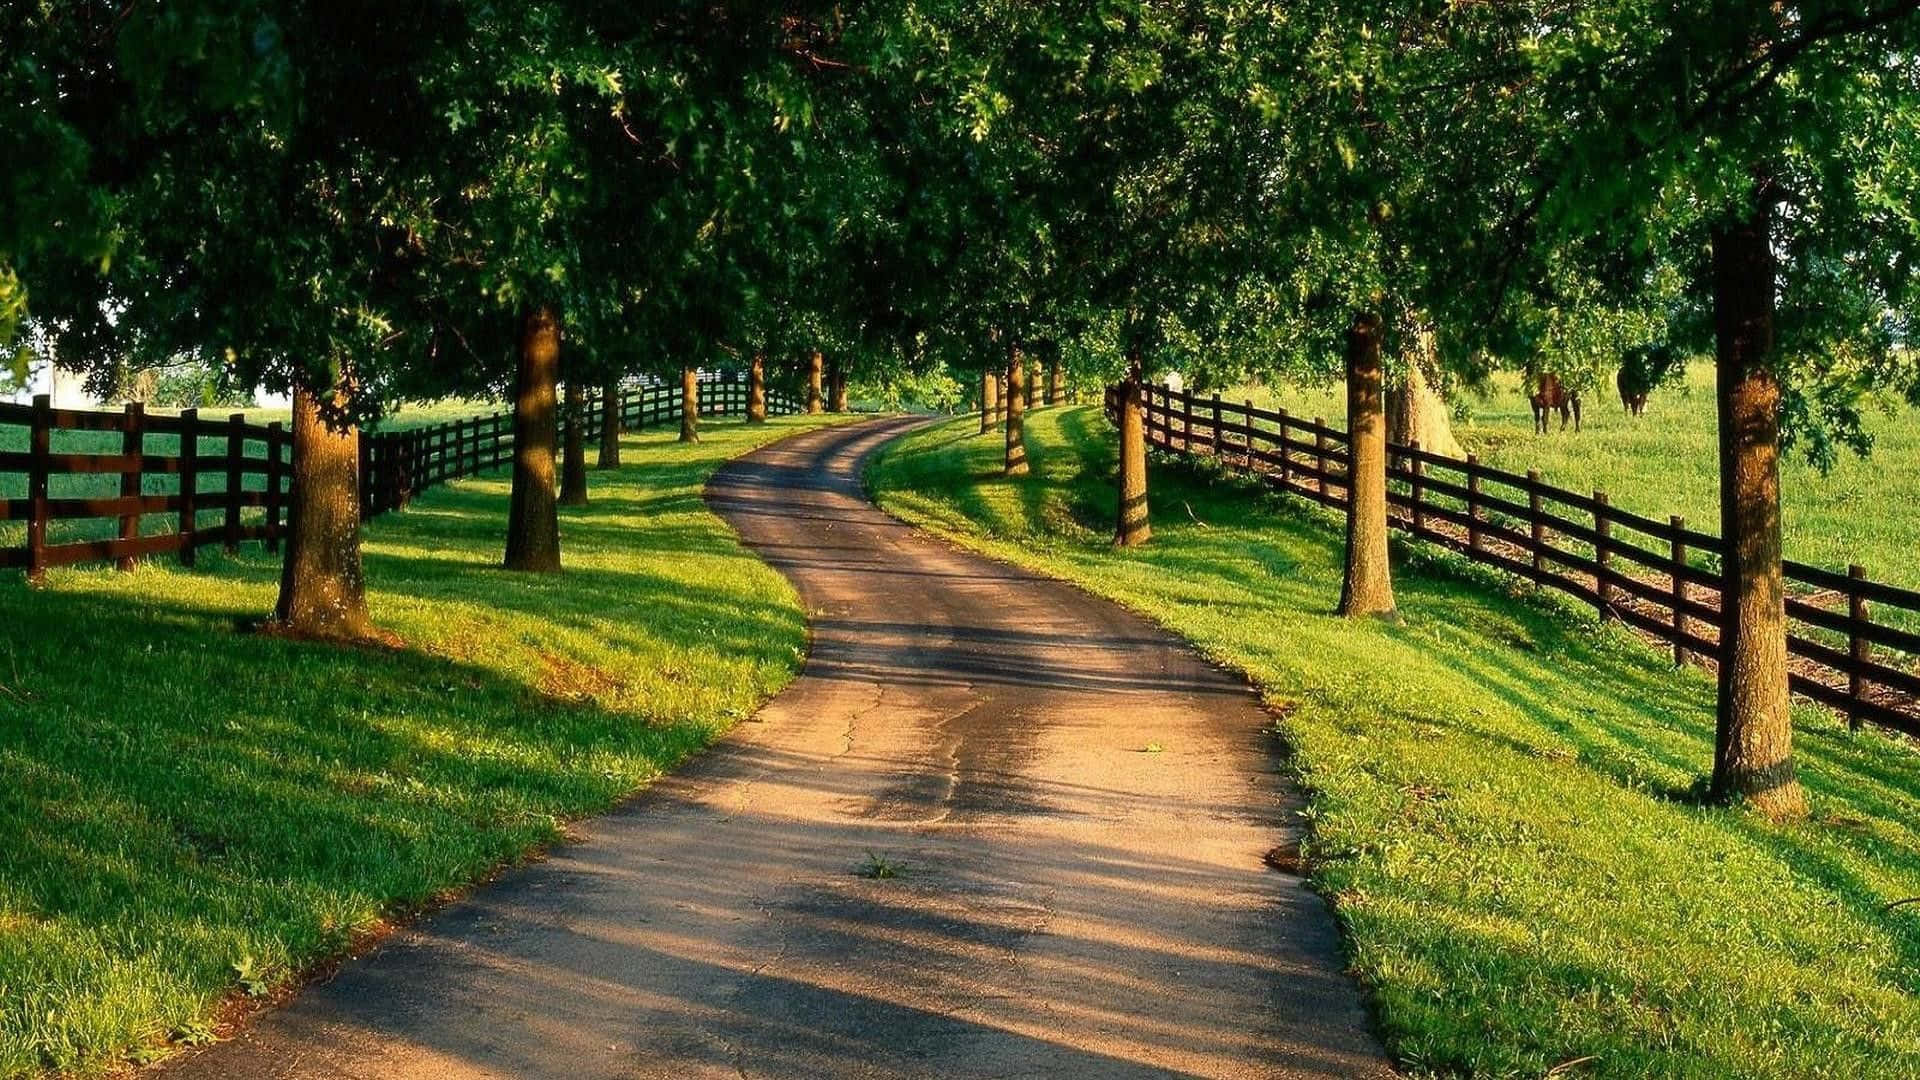 Take a stroll through the rolling hills of Country